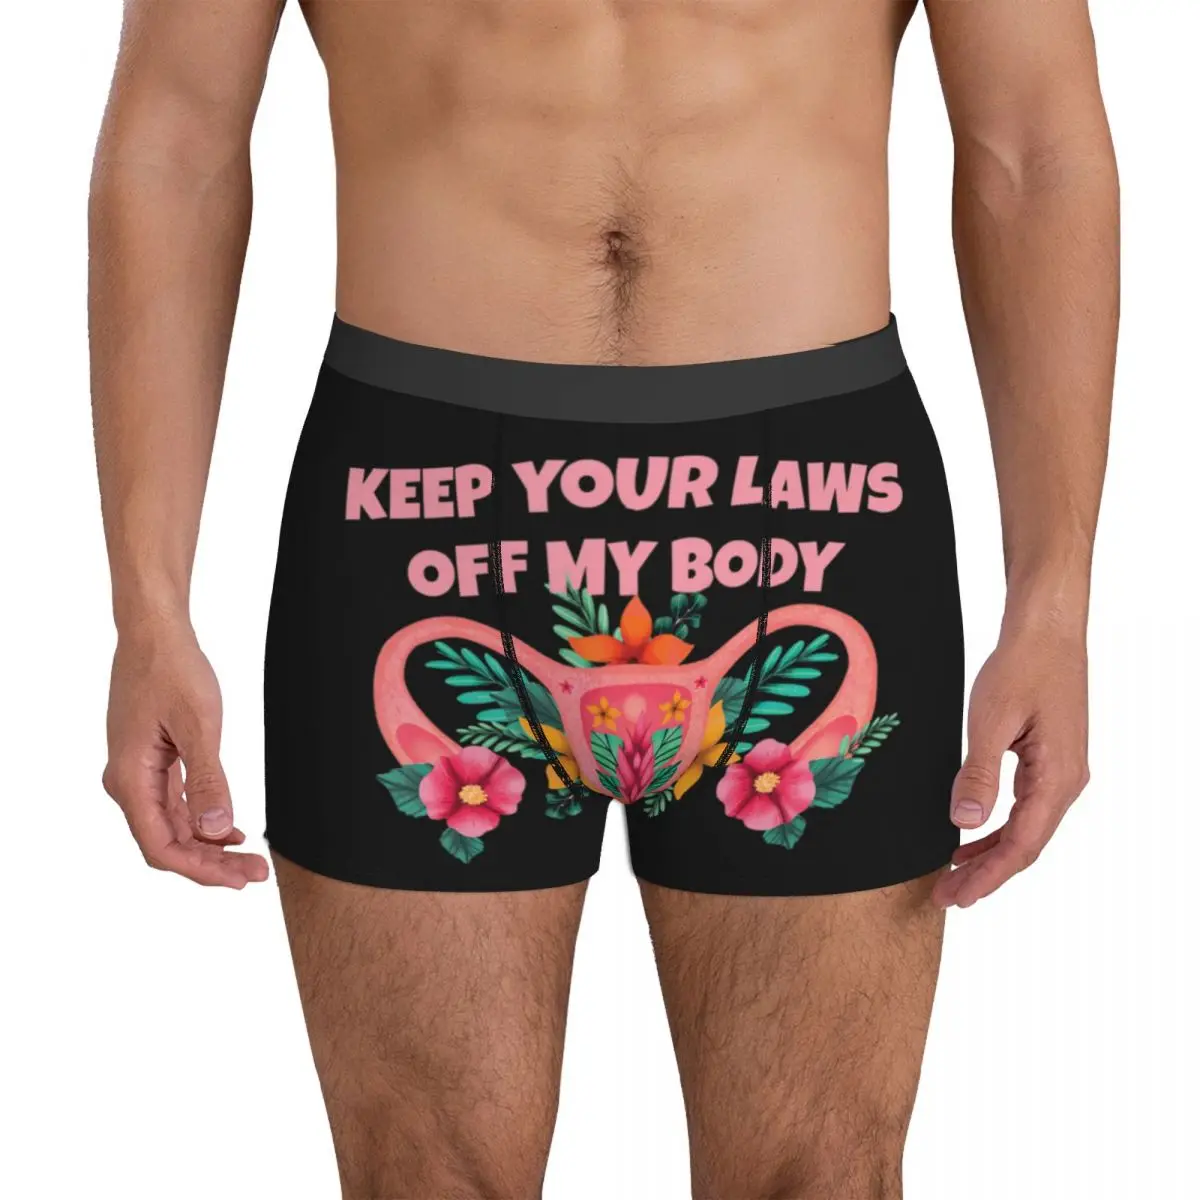 Keep Your Laws Off My Body Feminist Abortion Underwear Our Bodies Our Choice 3D Pouch Hot Trunk Design Boxer Brief Breathable